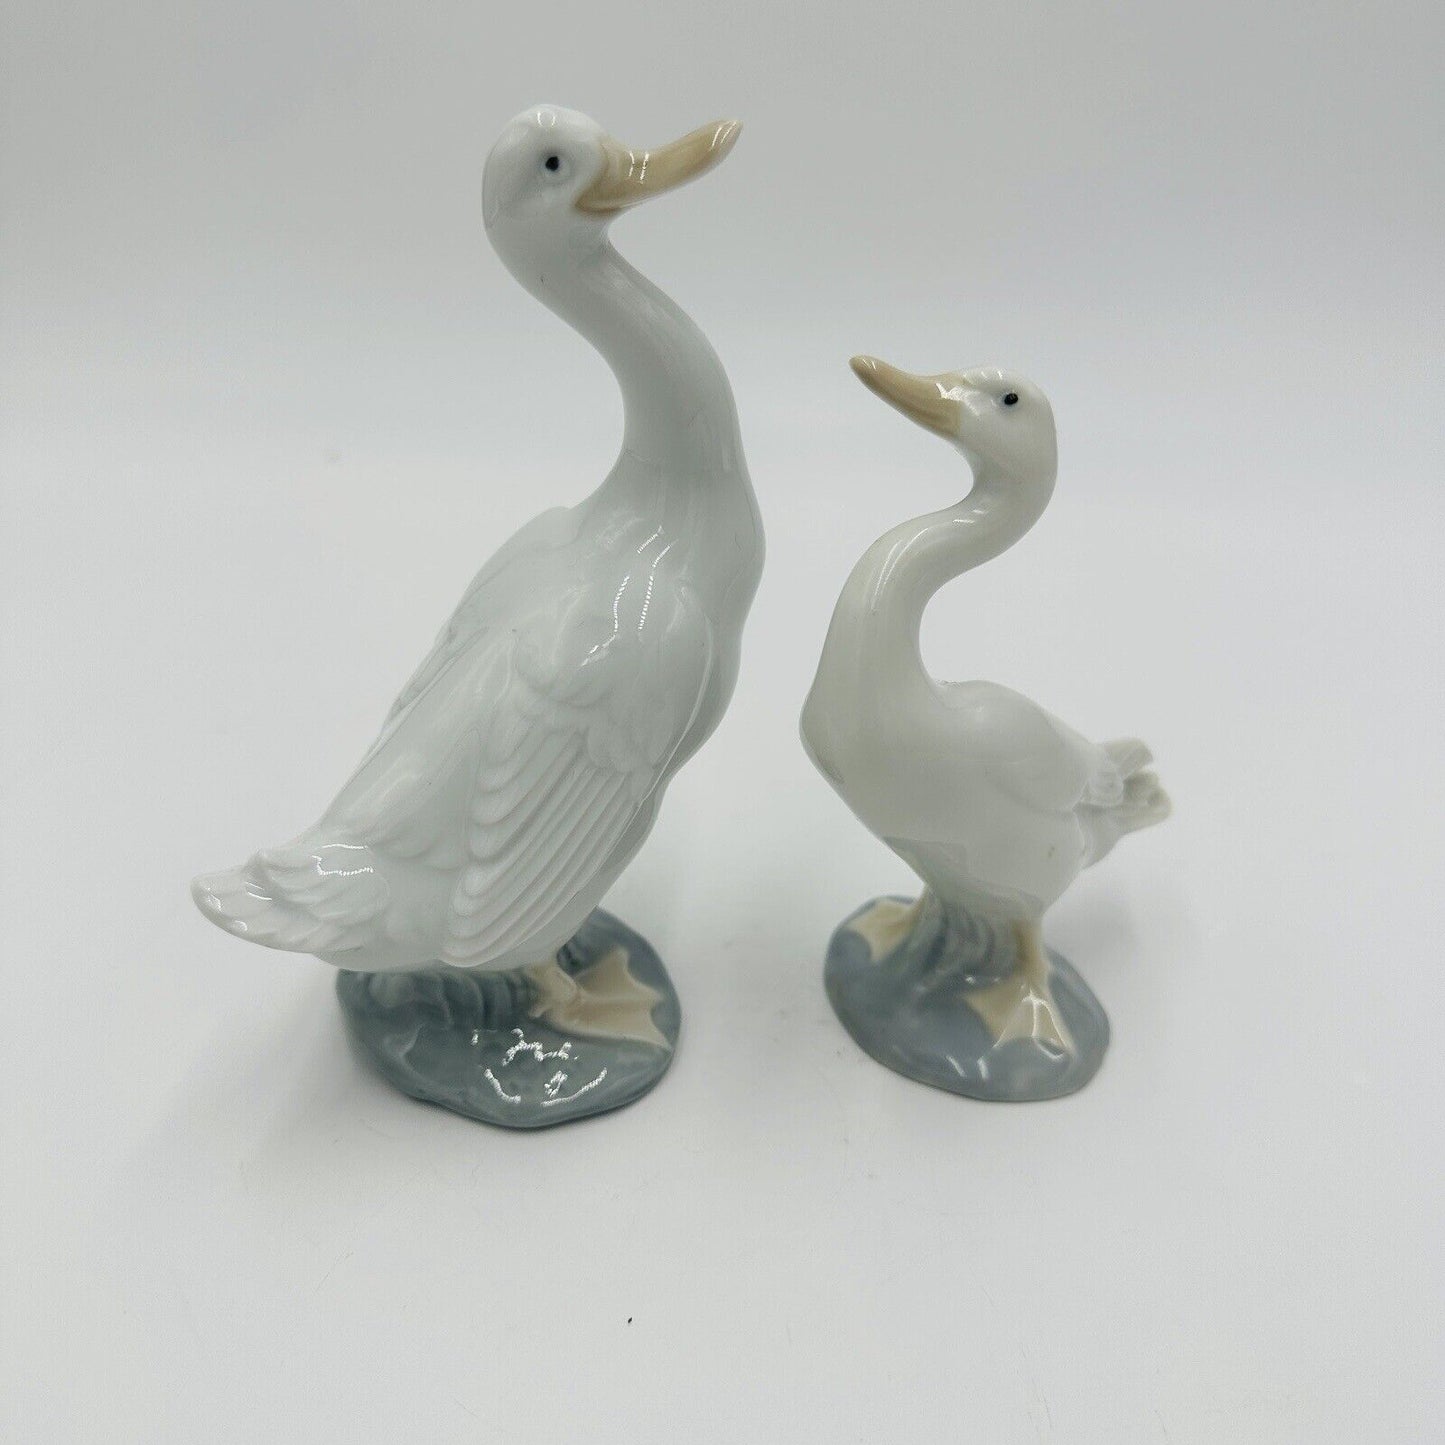 Lladro & Nao Porcelain Ducks Figurines Retired Made In Spain Vintage Glossy Whit